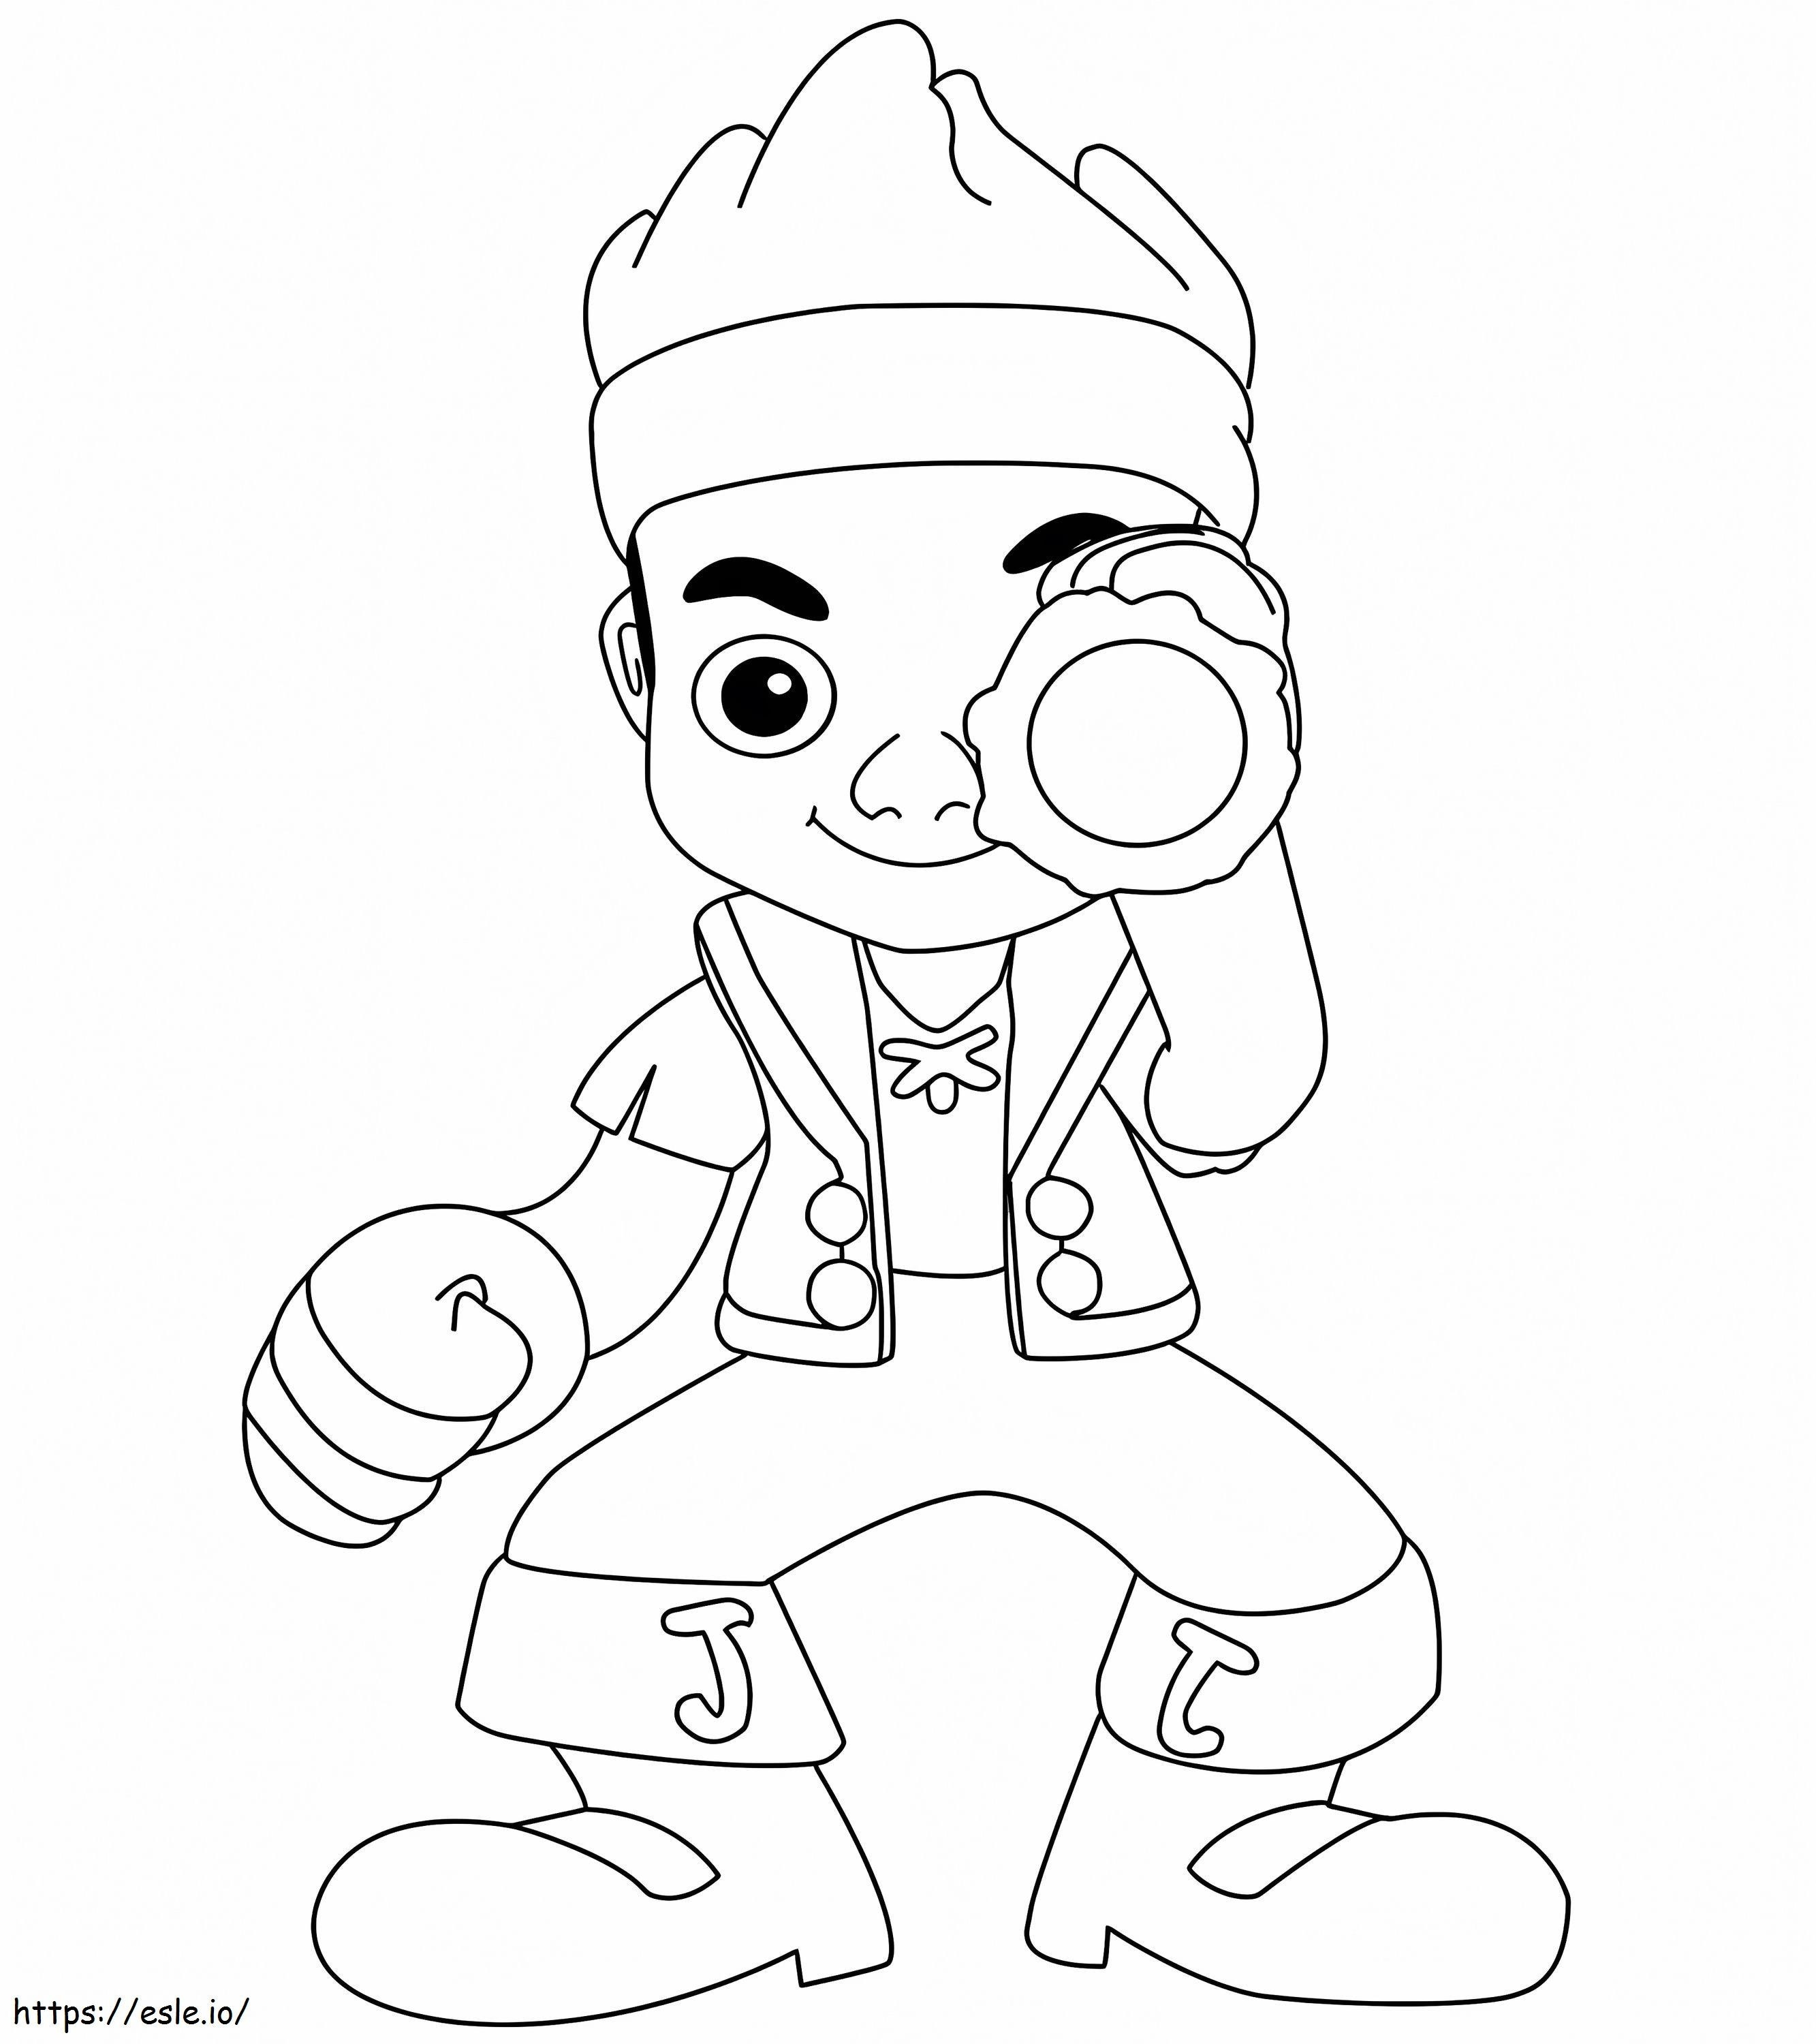 Little Pirate coloring page